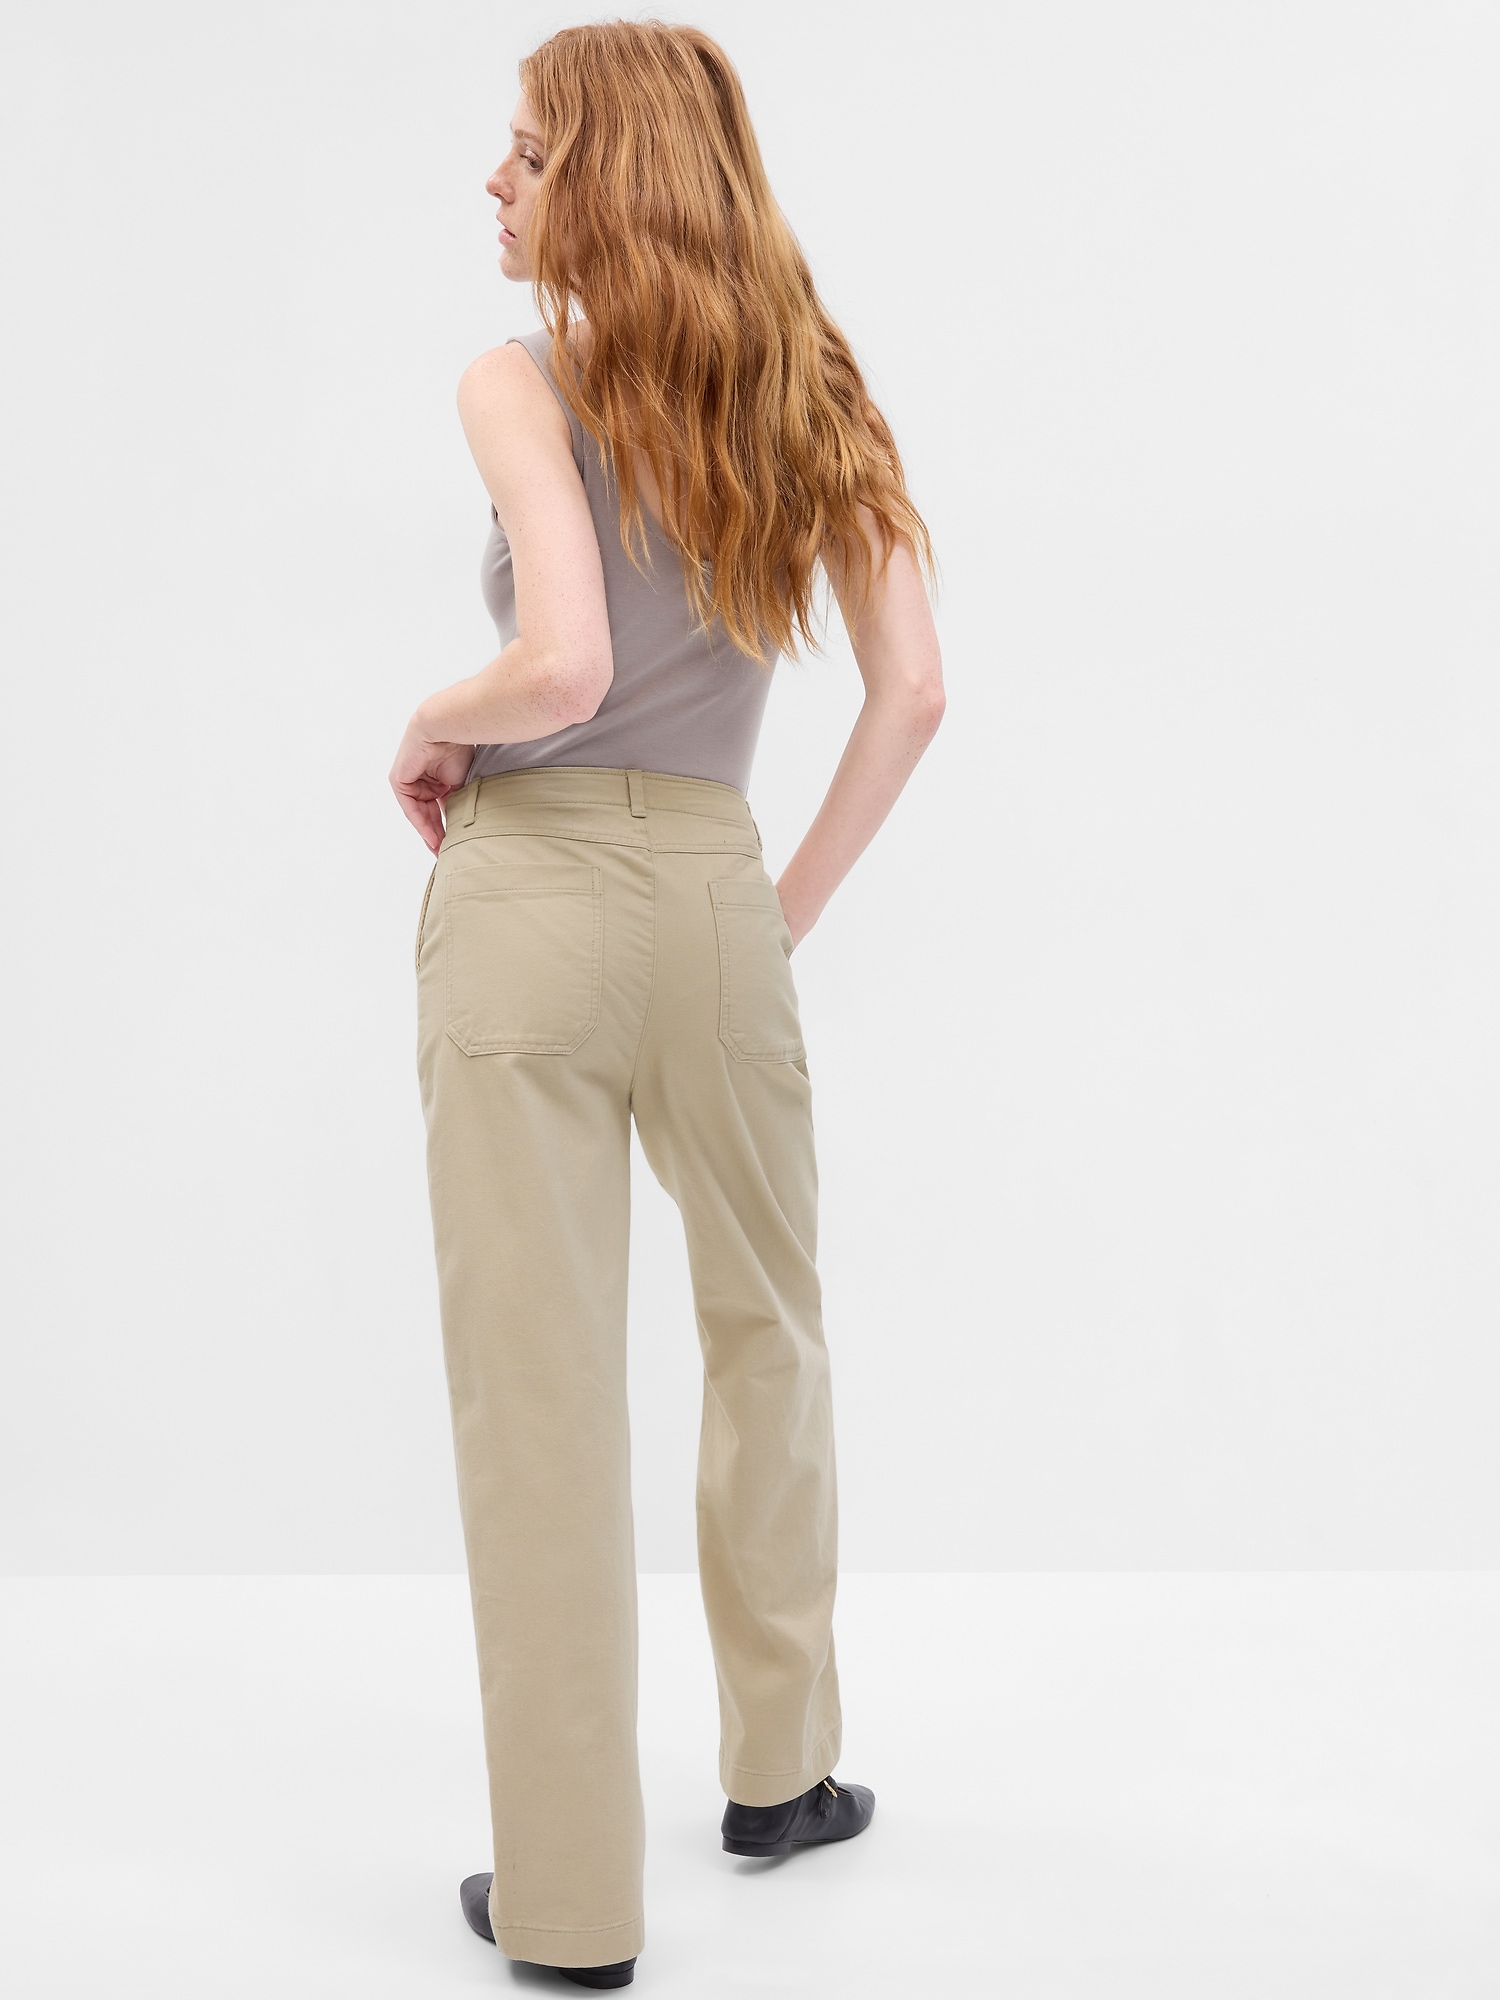 Black flat-front water-resistant limited-edition Women Trousers | Sumissura